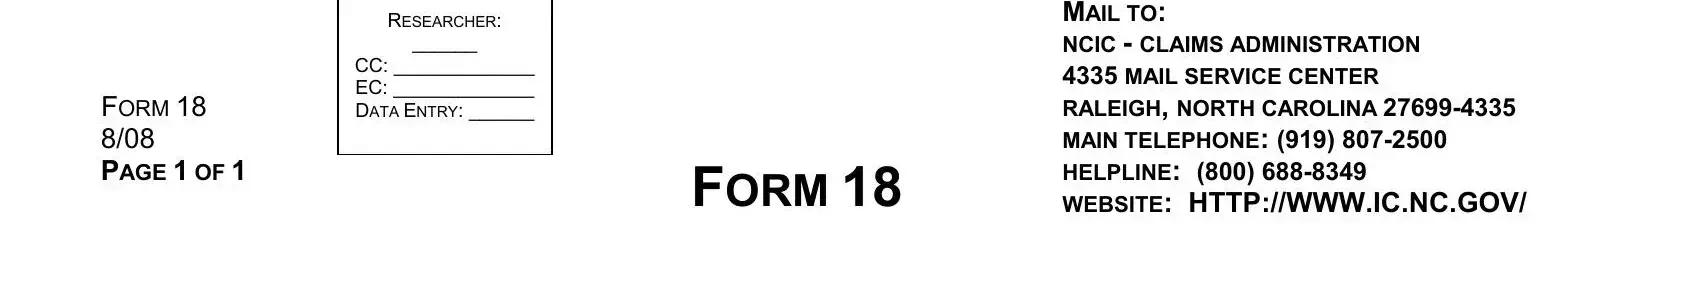 nc 18 form FORM 18 8/08 PAGE 1 OF 1, RESEARCHER:, CC: _____________ EC:, FORM 18, and MAIL TO: NCIC - CLAIMS blanks to fill